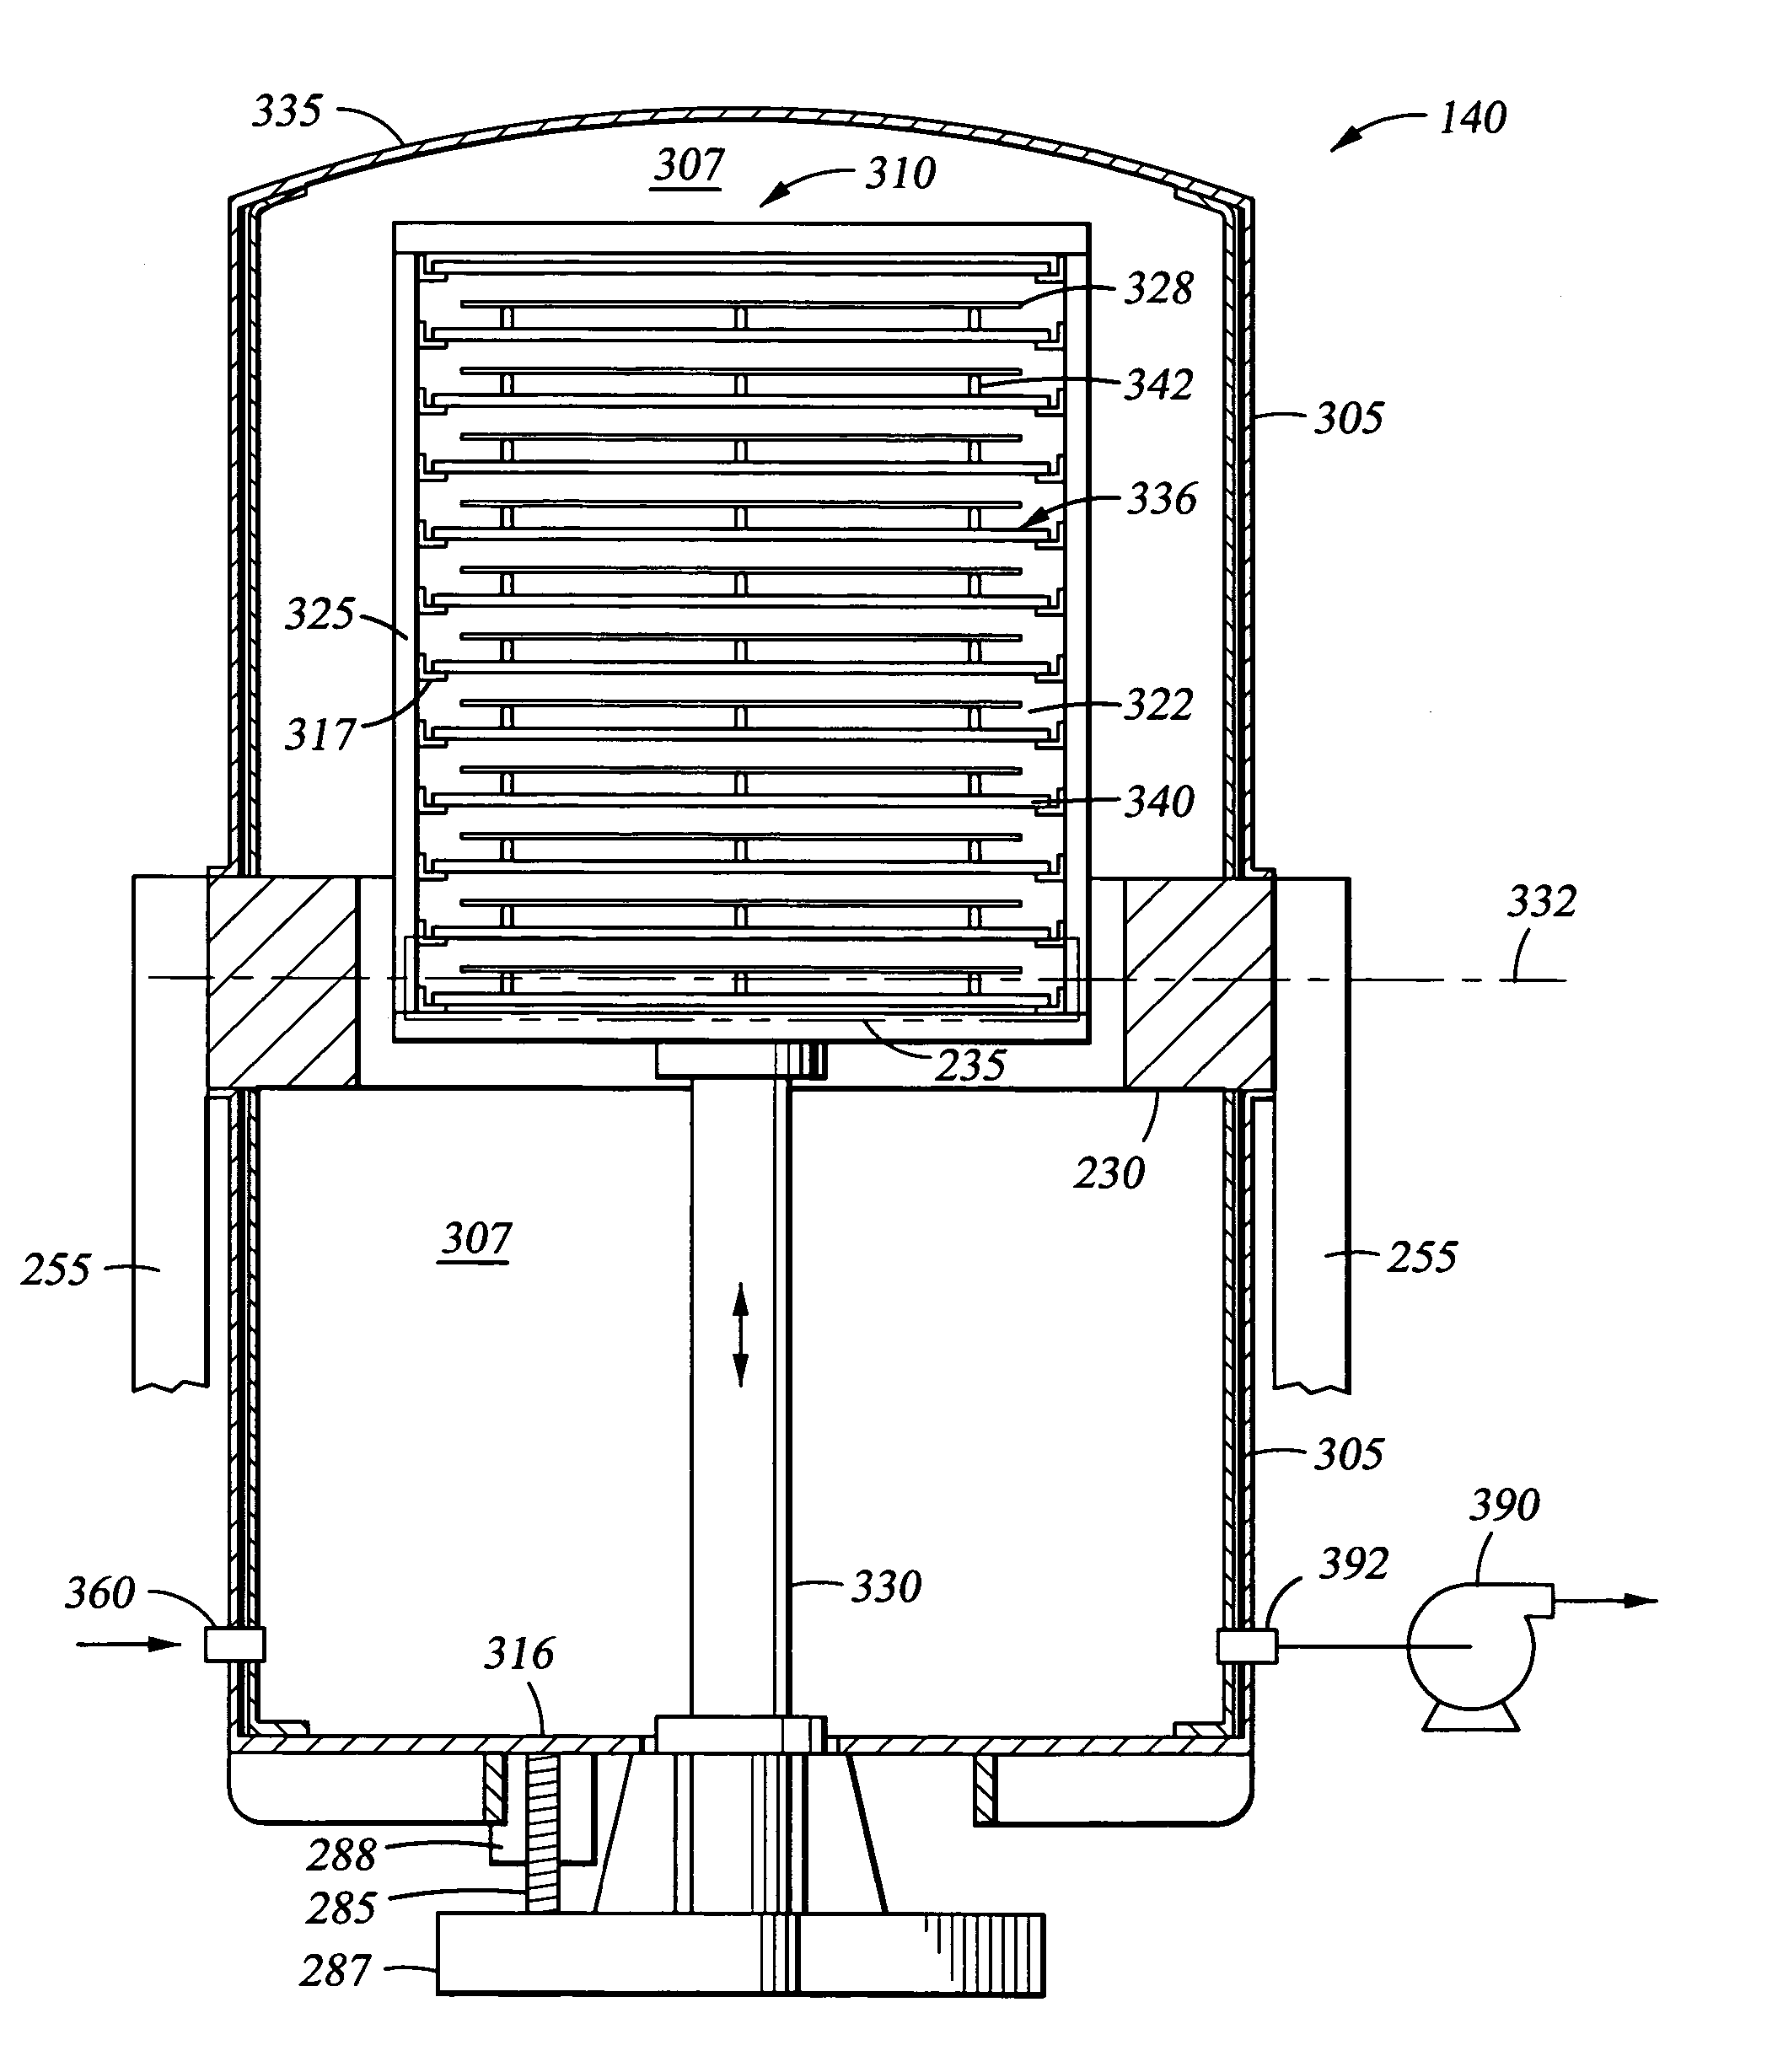 Chamber for uniform substrate heating